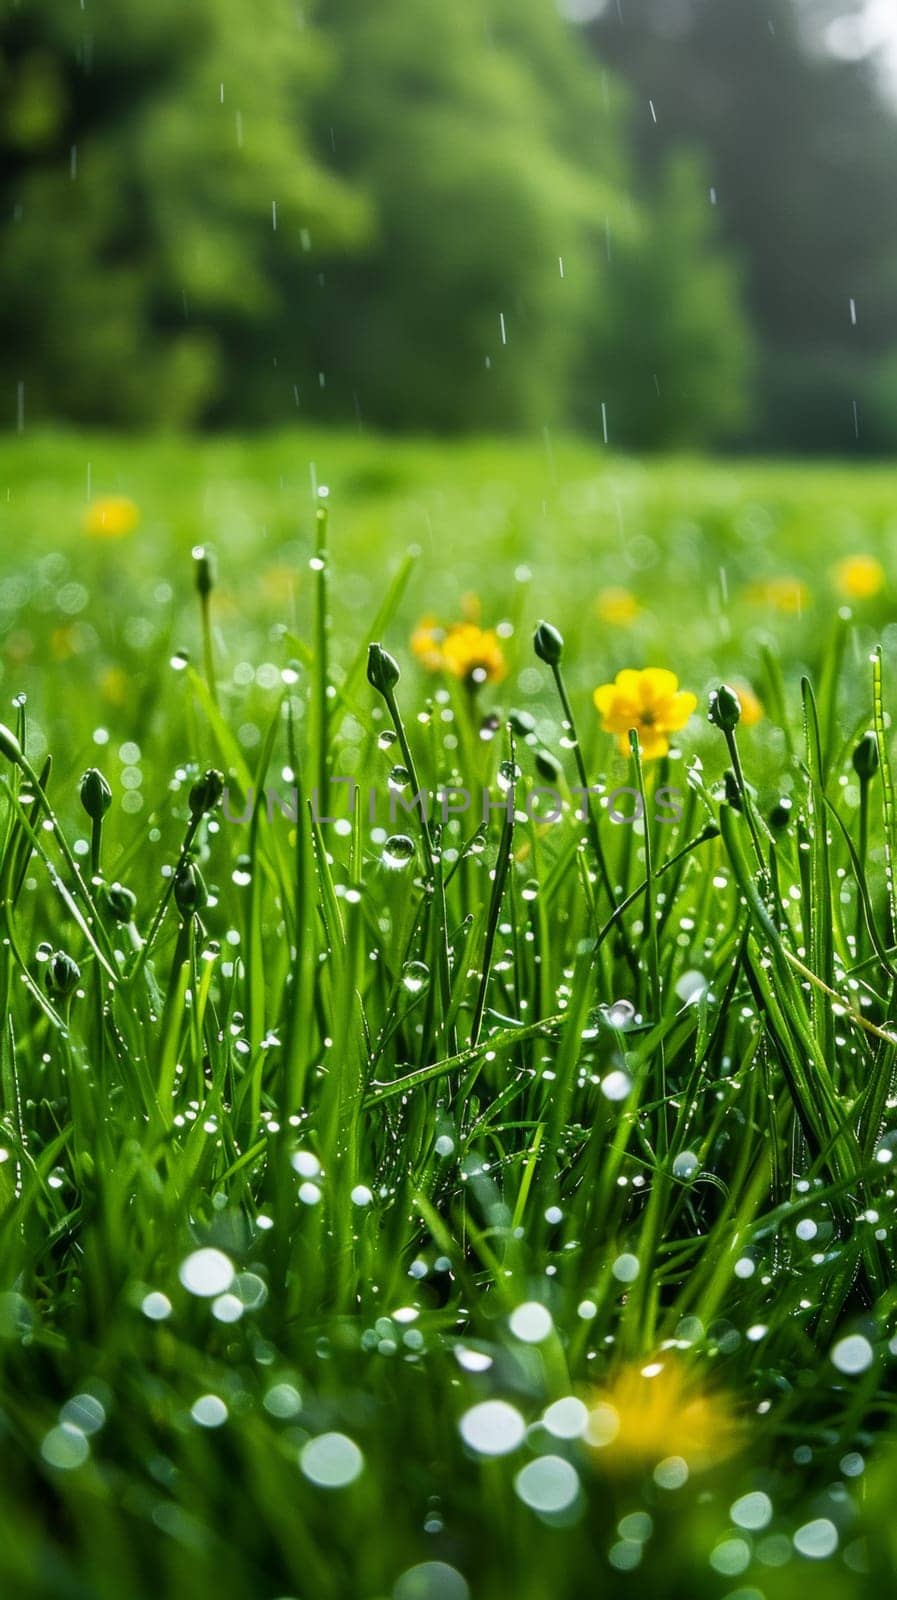 A close up of a field with grass and flowers covered in rain